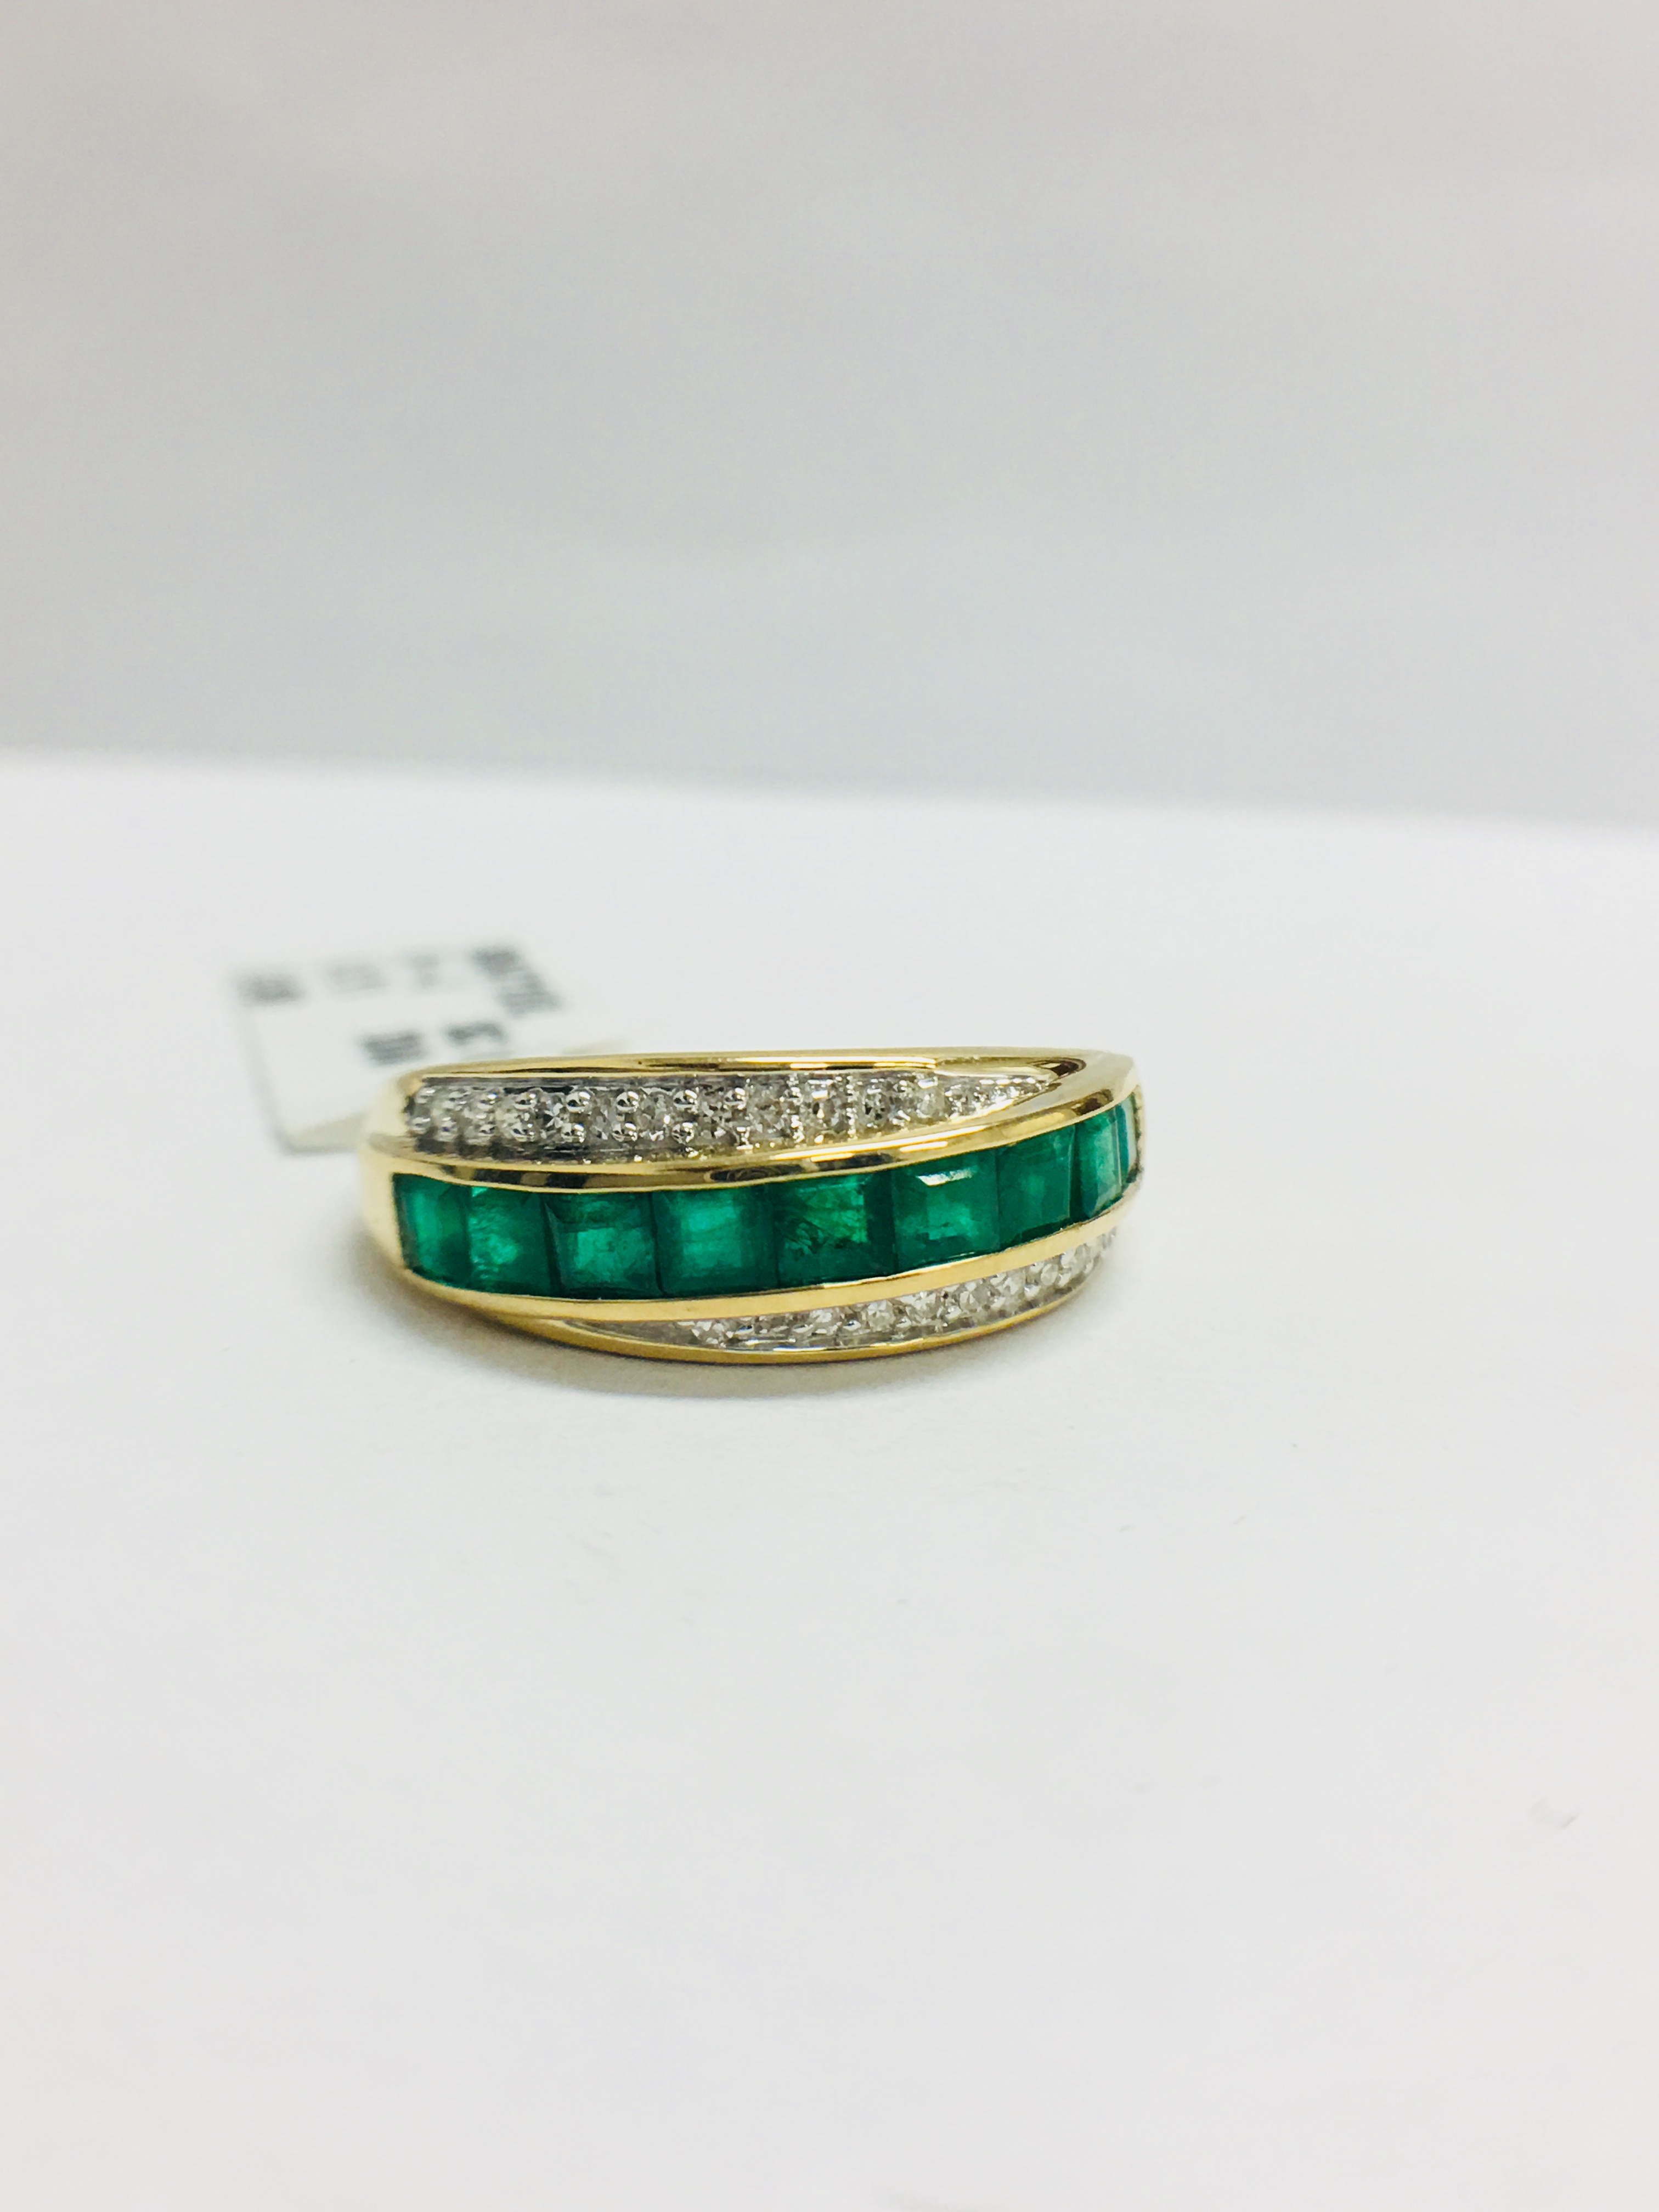 9Ct Yellow Gold Diamond Emerald Crossover Style Ring, - Image 9 of 10